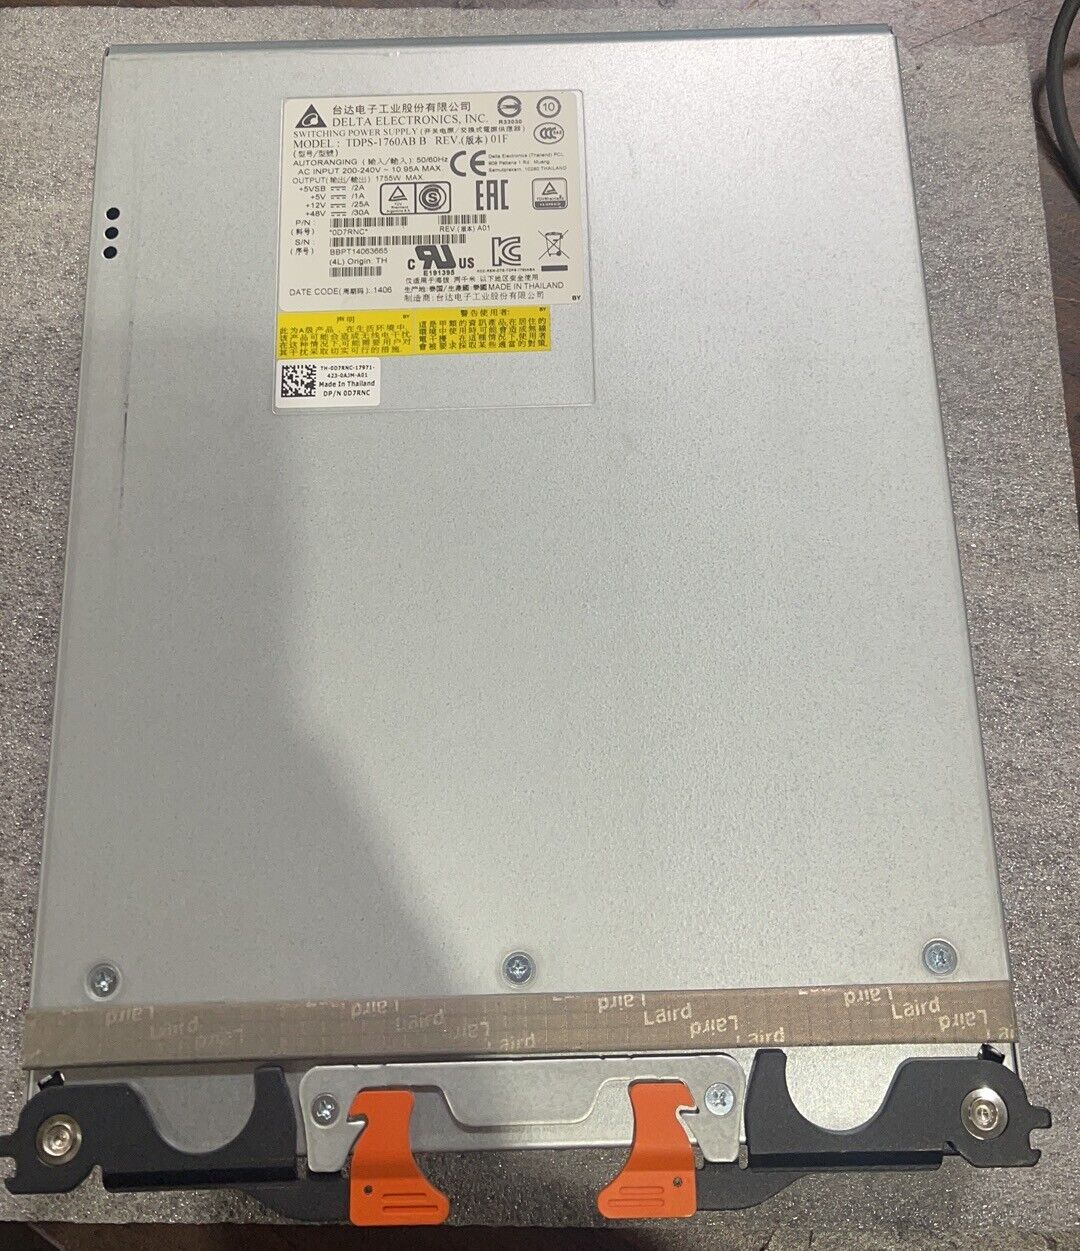 Dell PowerVault MD3260 MD3660 MD3060E 1755W Power Supply D7RNC TDPS-1760AB B